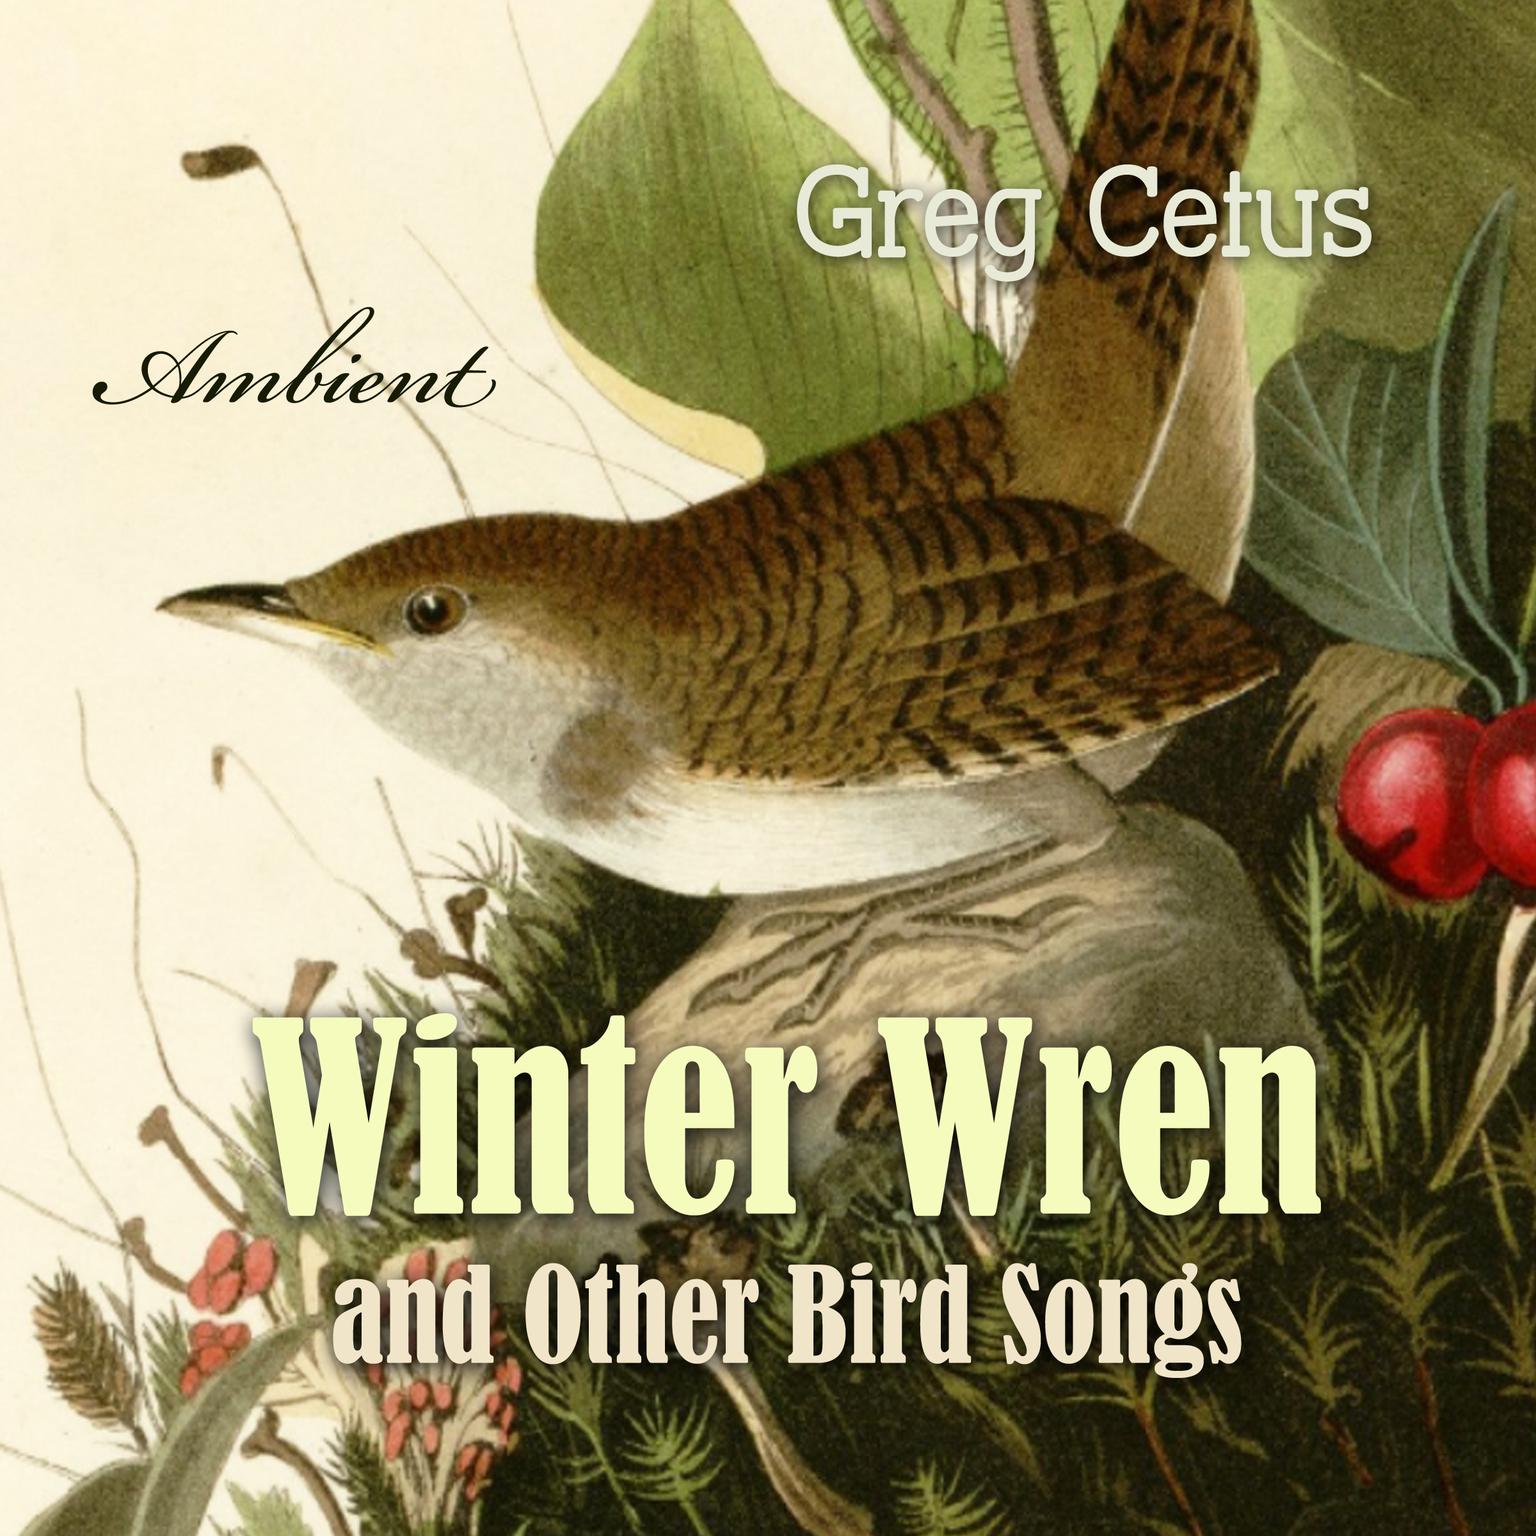 Winter Wren and Other Bird Songs: Nature Sounds for Mindfullness Audiobook, by Greg Cetus